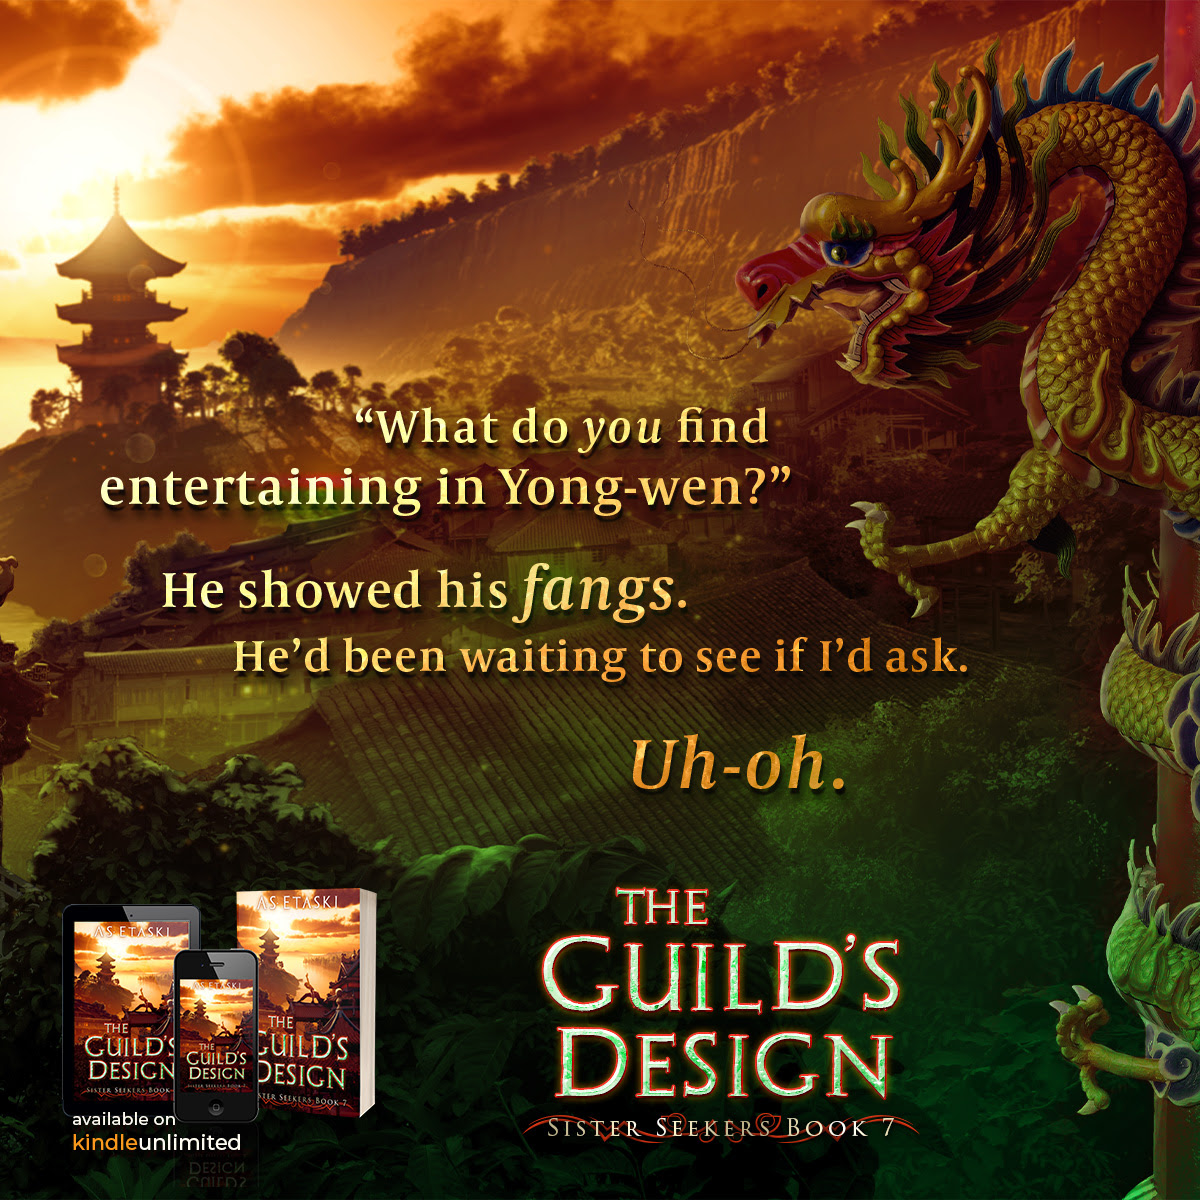 The Guild's Design out in Paperback!  72a09a97-ef29-3d6c-b7f9-40a1db88c8ef